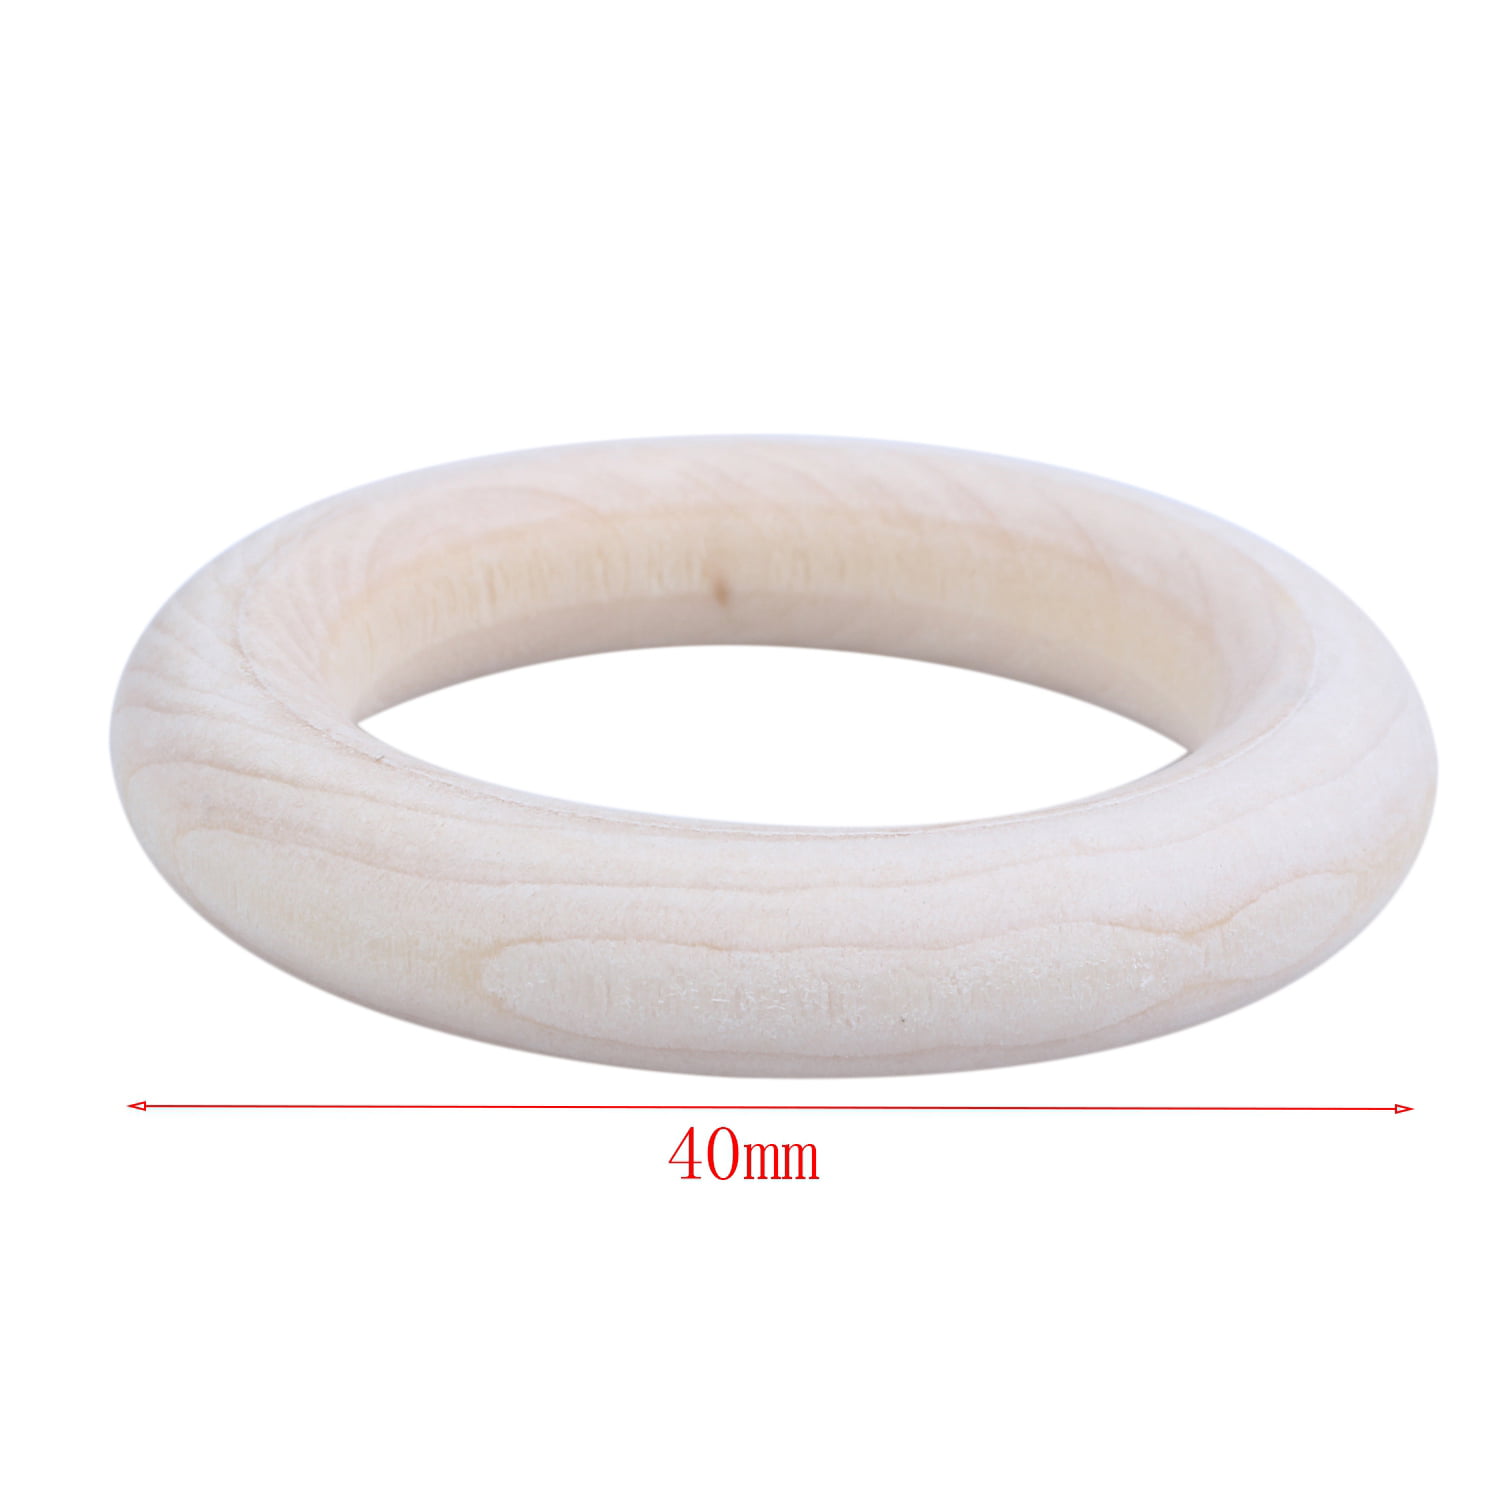 5X Unfinished Blank Wooden Teether Rings Maple Wood Baby Craft DIY Toys 40m Y3L6 